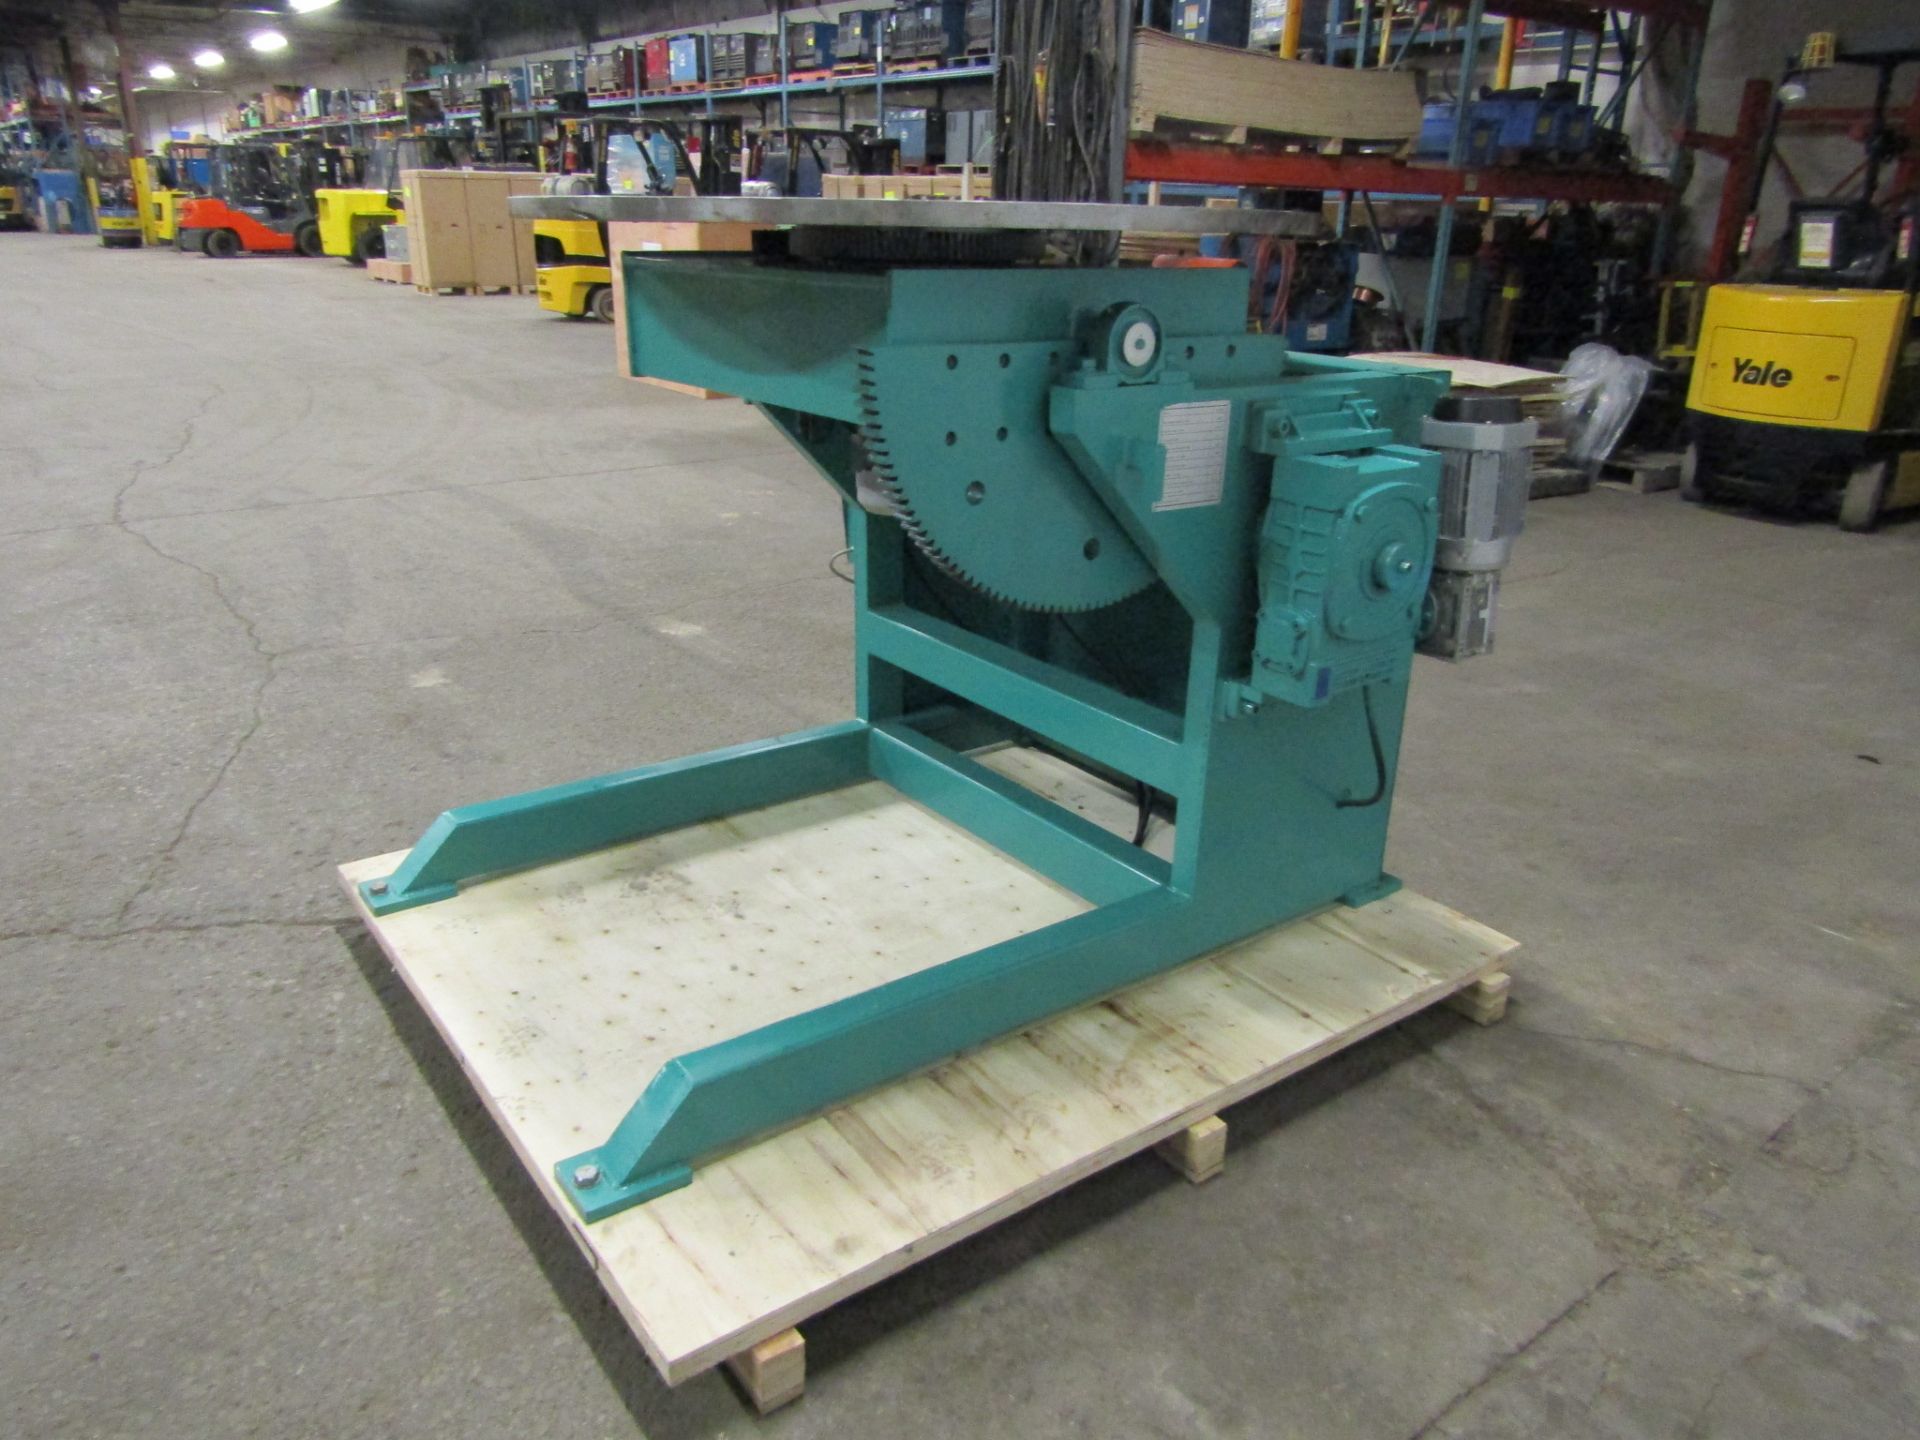 Verner model VD-5000 WELDING POSITIONER 5000lbs capacity - tilt and rotate with variable speed drive - Image 4 of 4